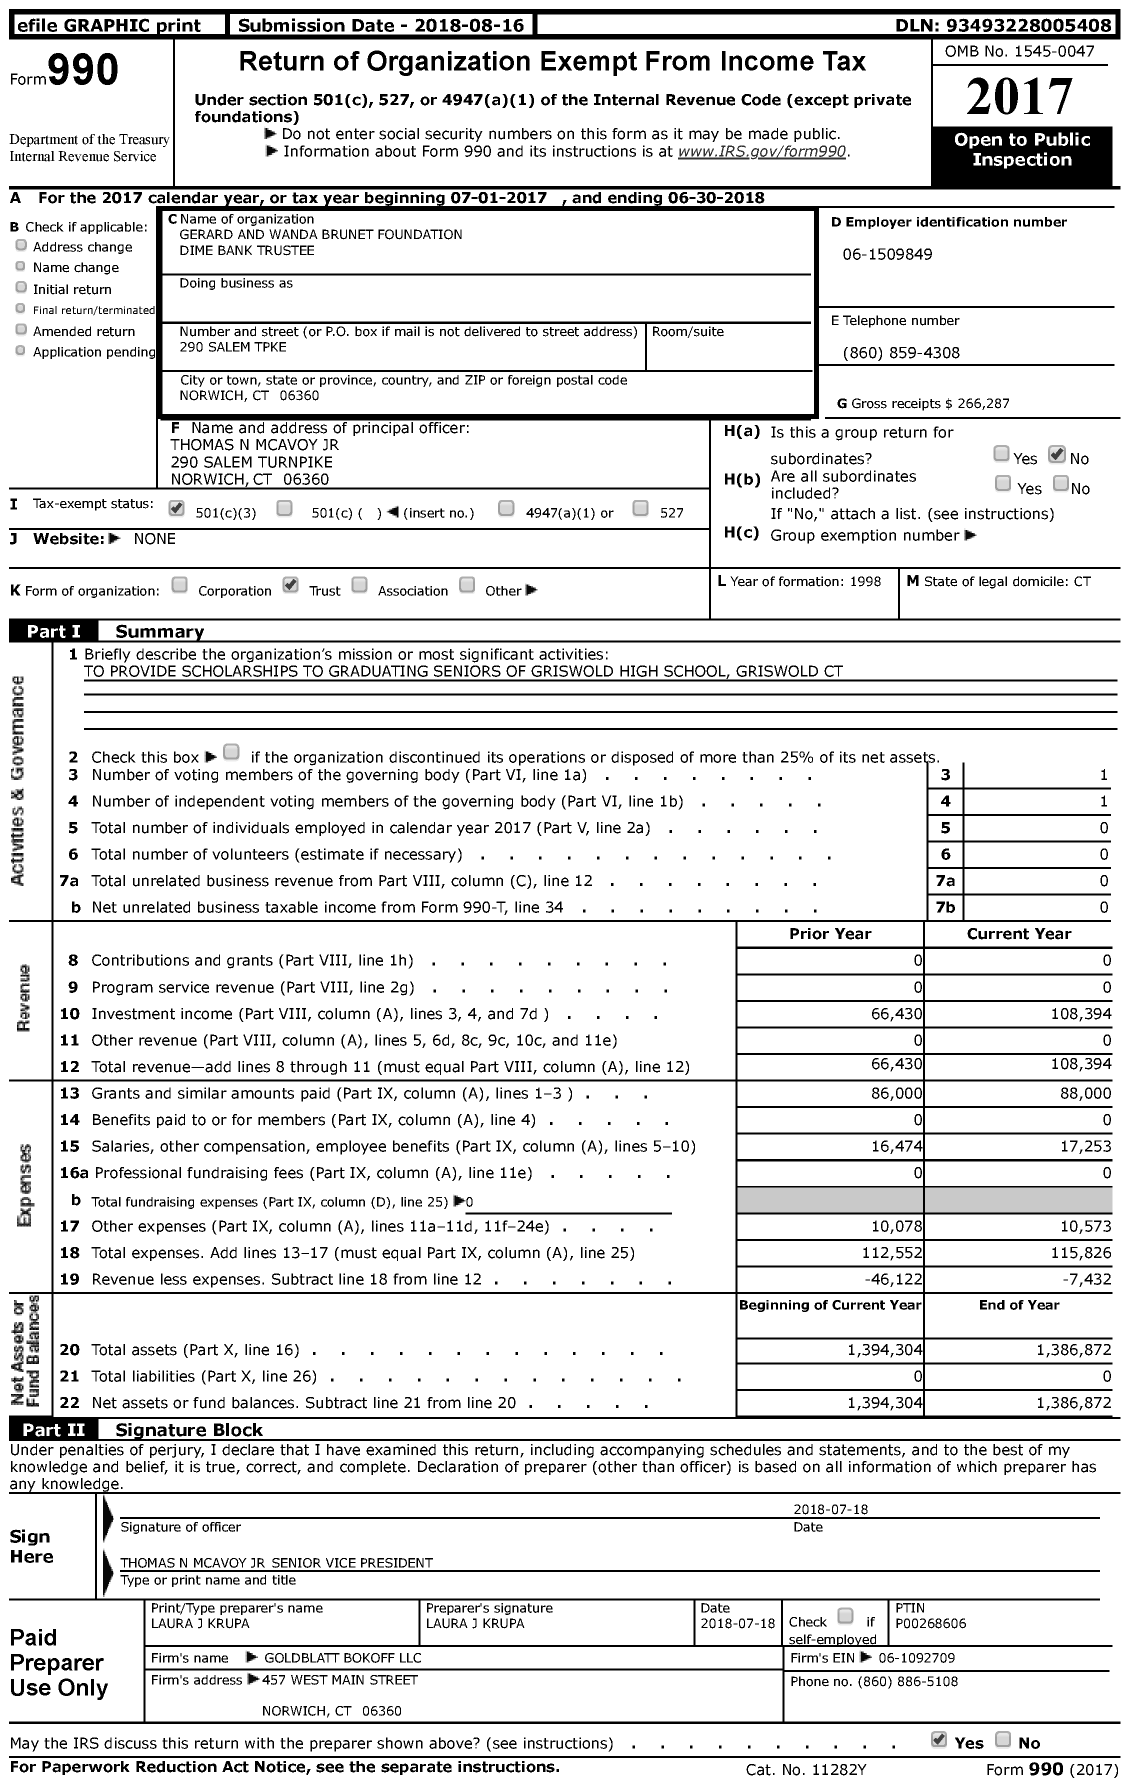 Image of first page of 2017 Form 990 for Gerard and Wanda Brunet Foundation Dime Bank Trustee